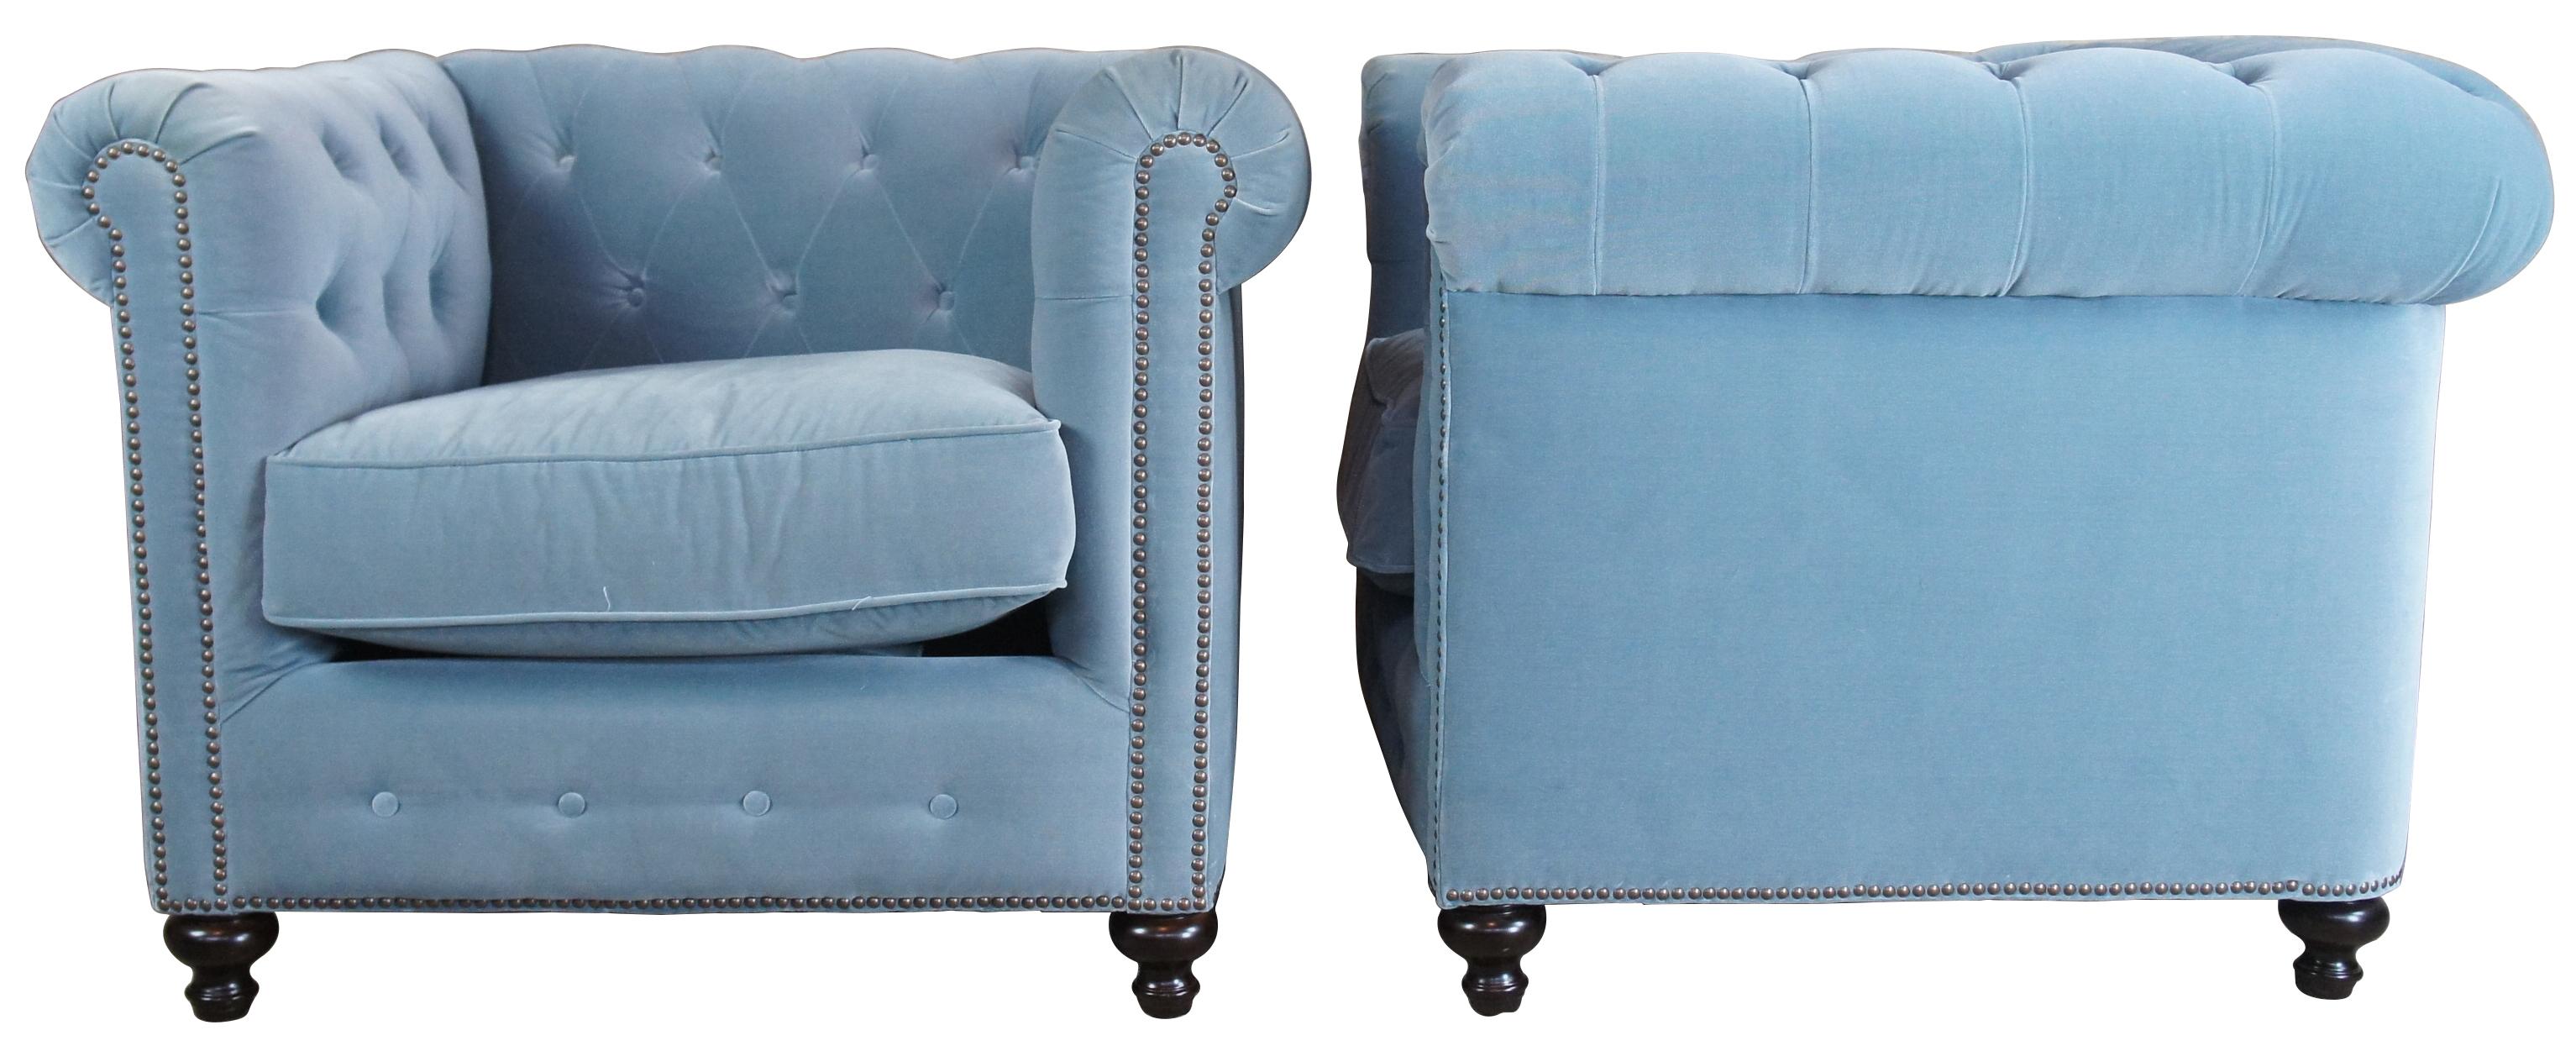 Dating back to the 18th century, the chesterfield was once the mark of class and stature. Today, it's symbolic of great style. Inspired by this iconic British design. The Small Barrow chair byu Frontgate features a button-tufted back with a low,